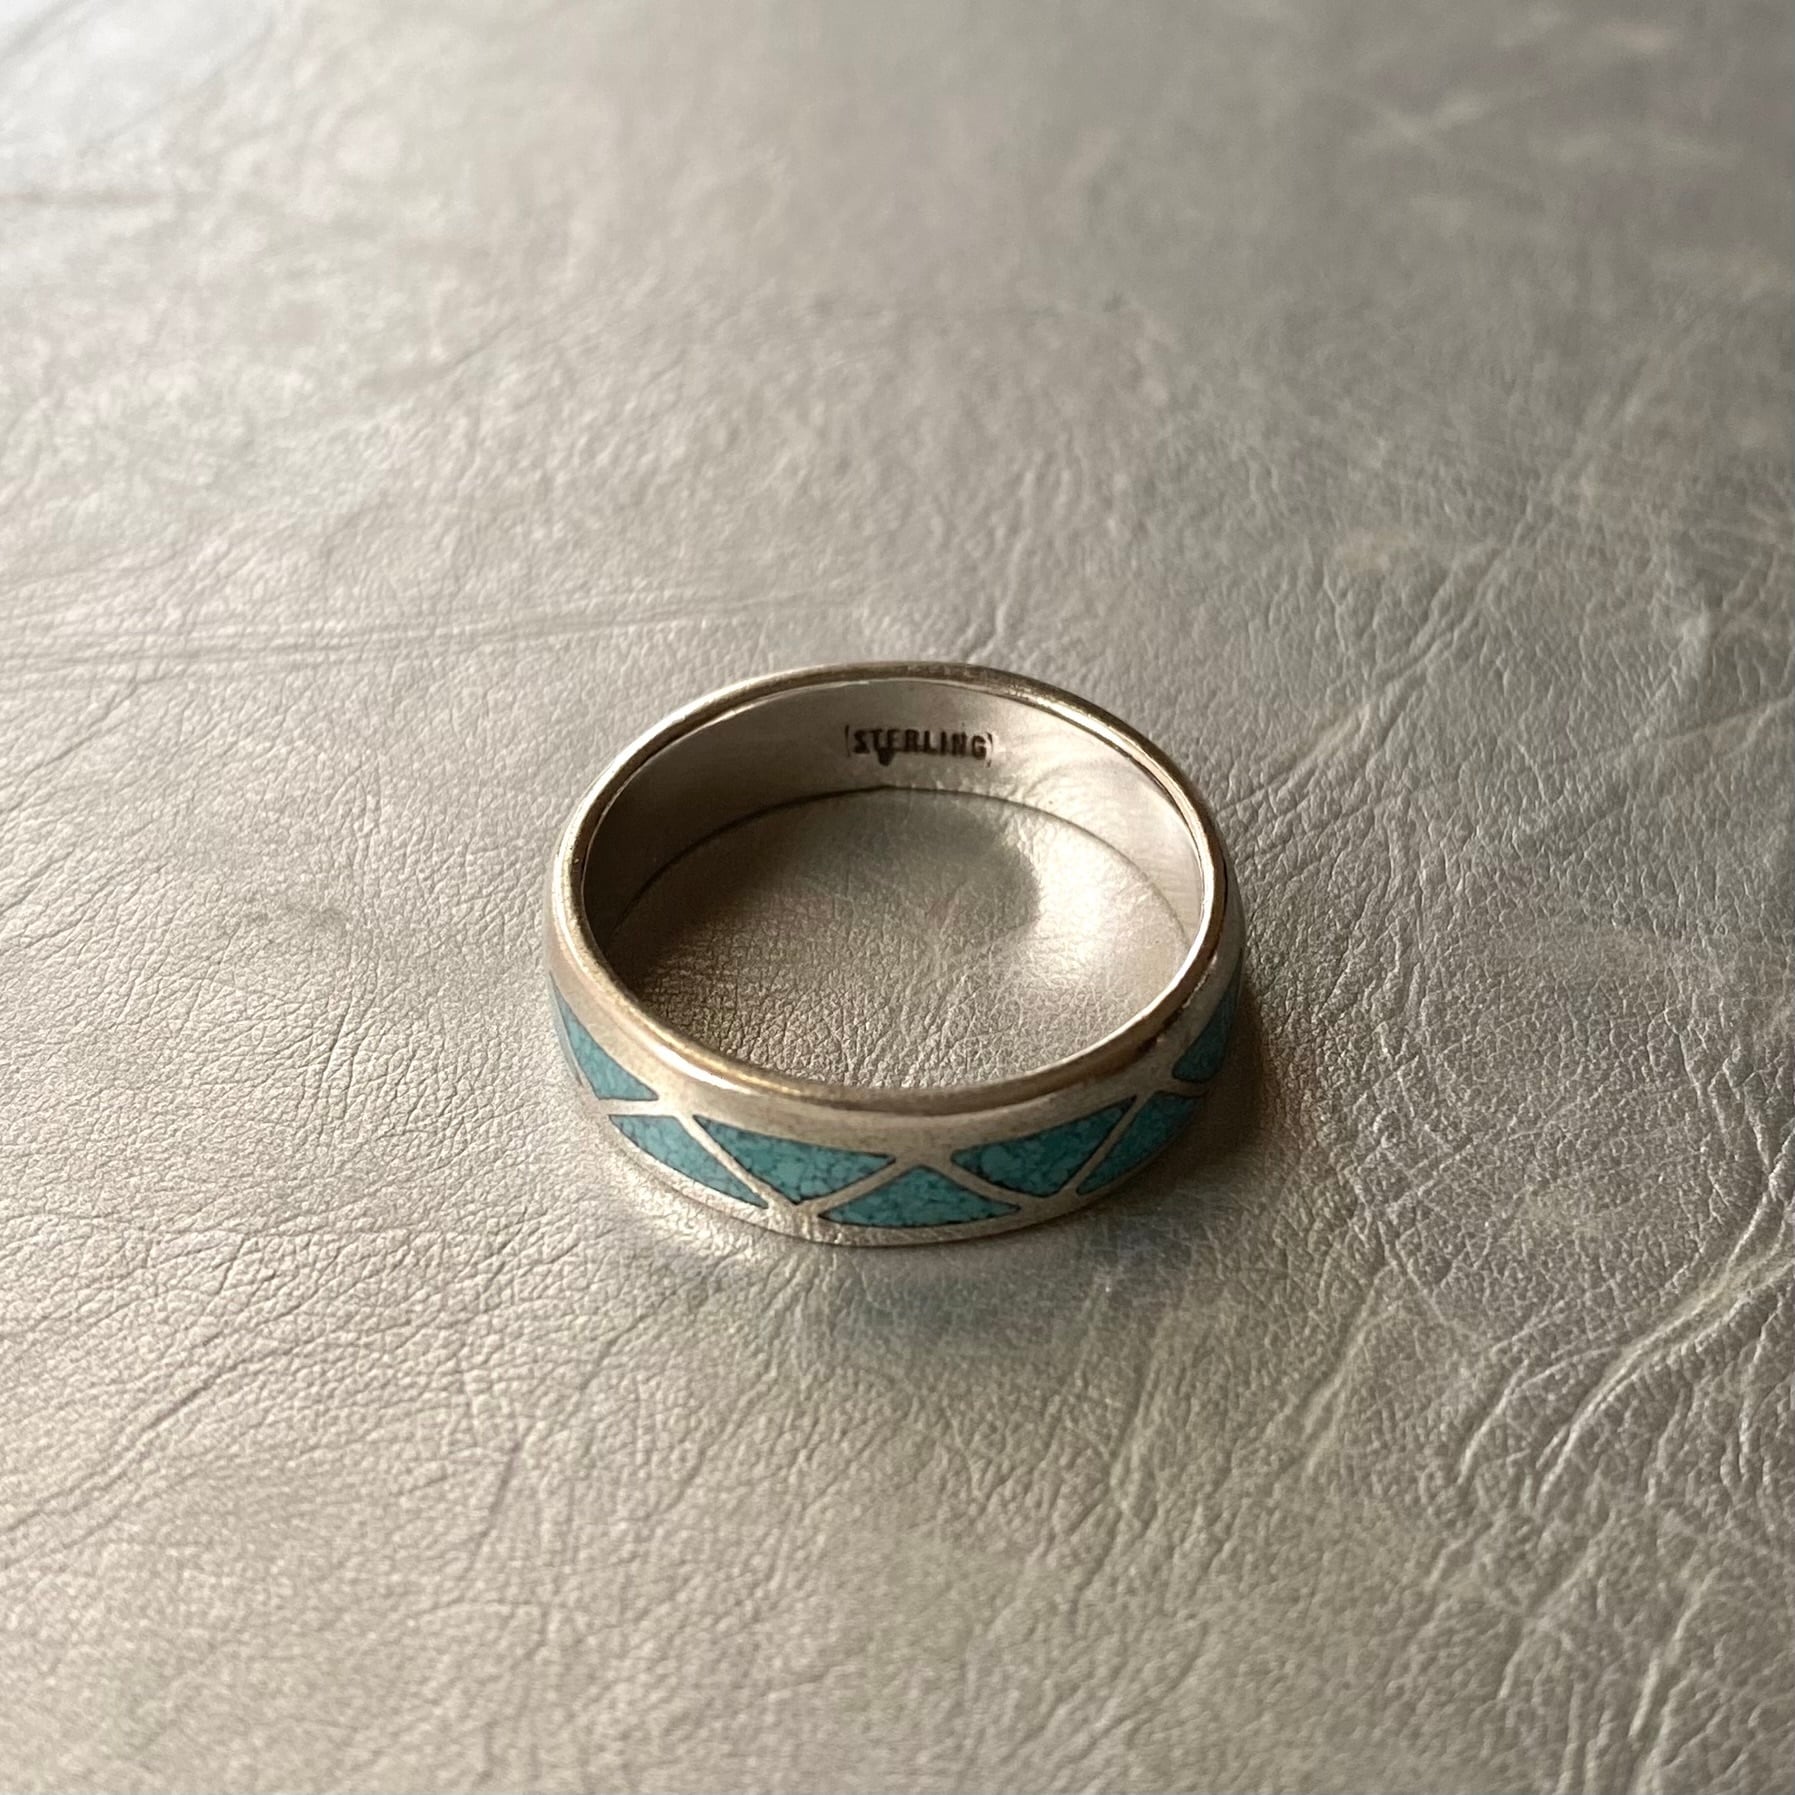 Vintage 70s〜80s USA silver 925 turquoise inlay ring アメリカ 